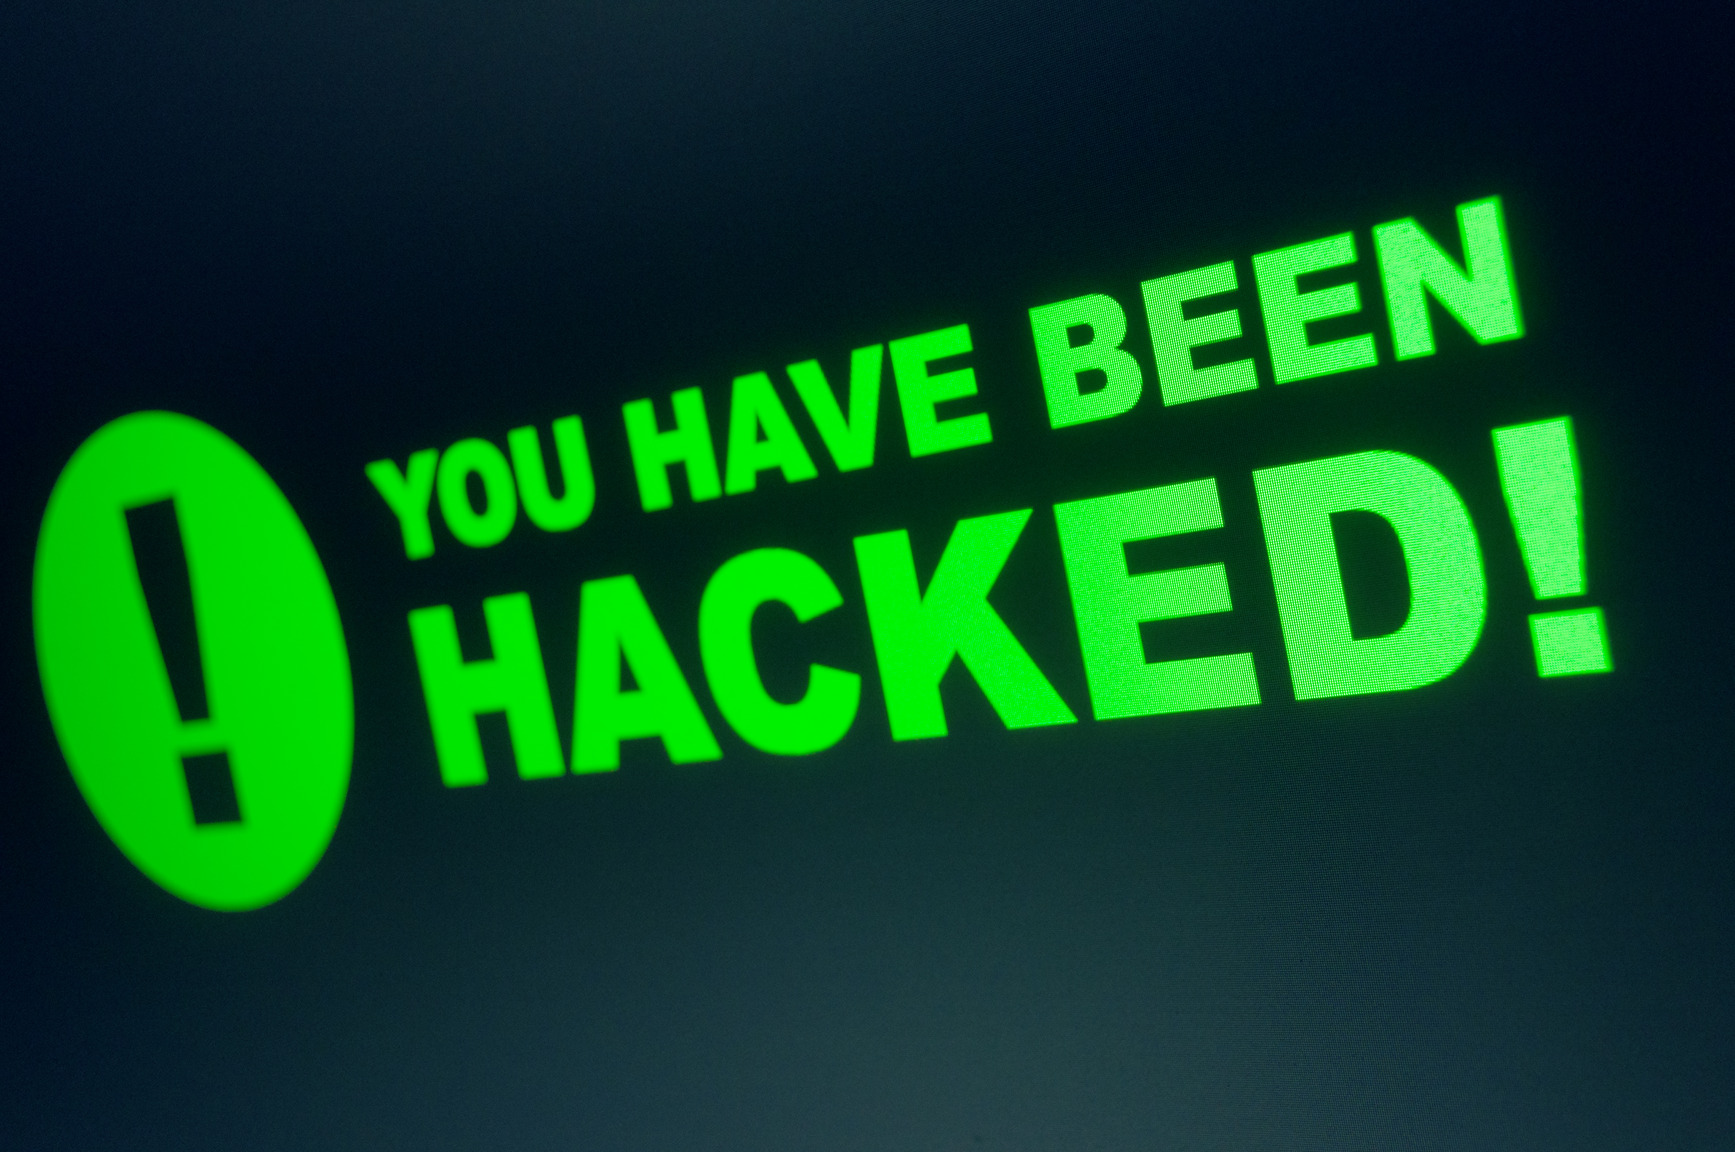 you have been hacked wallpaper,green,text,font,logo,signage